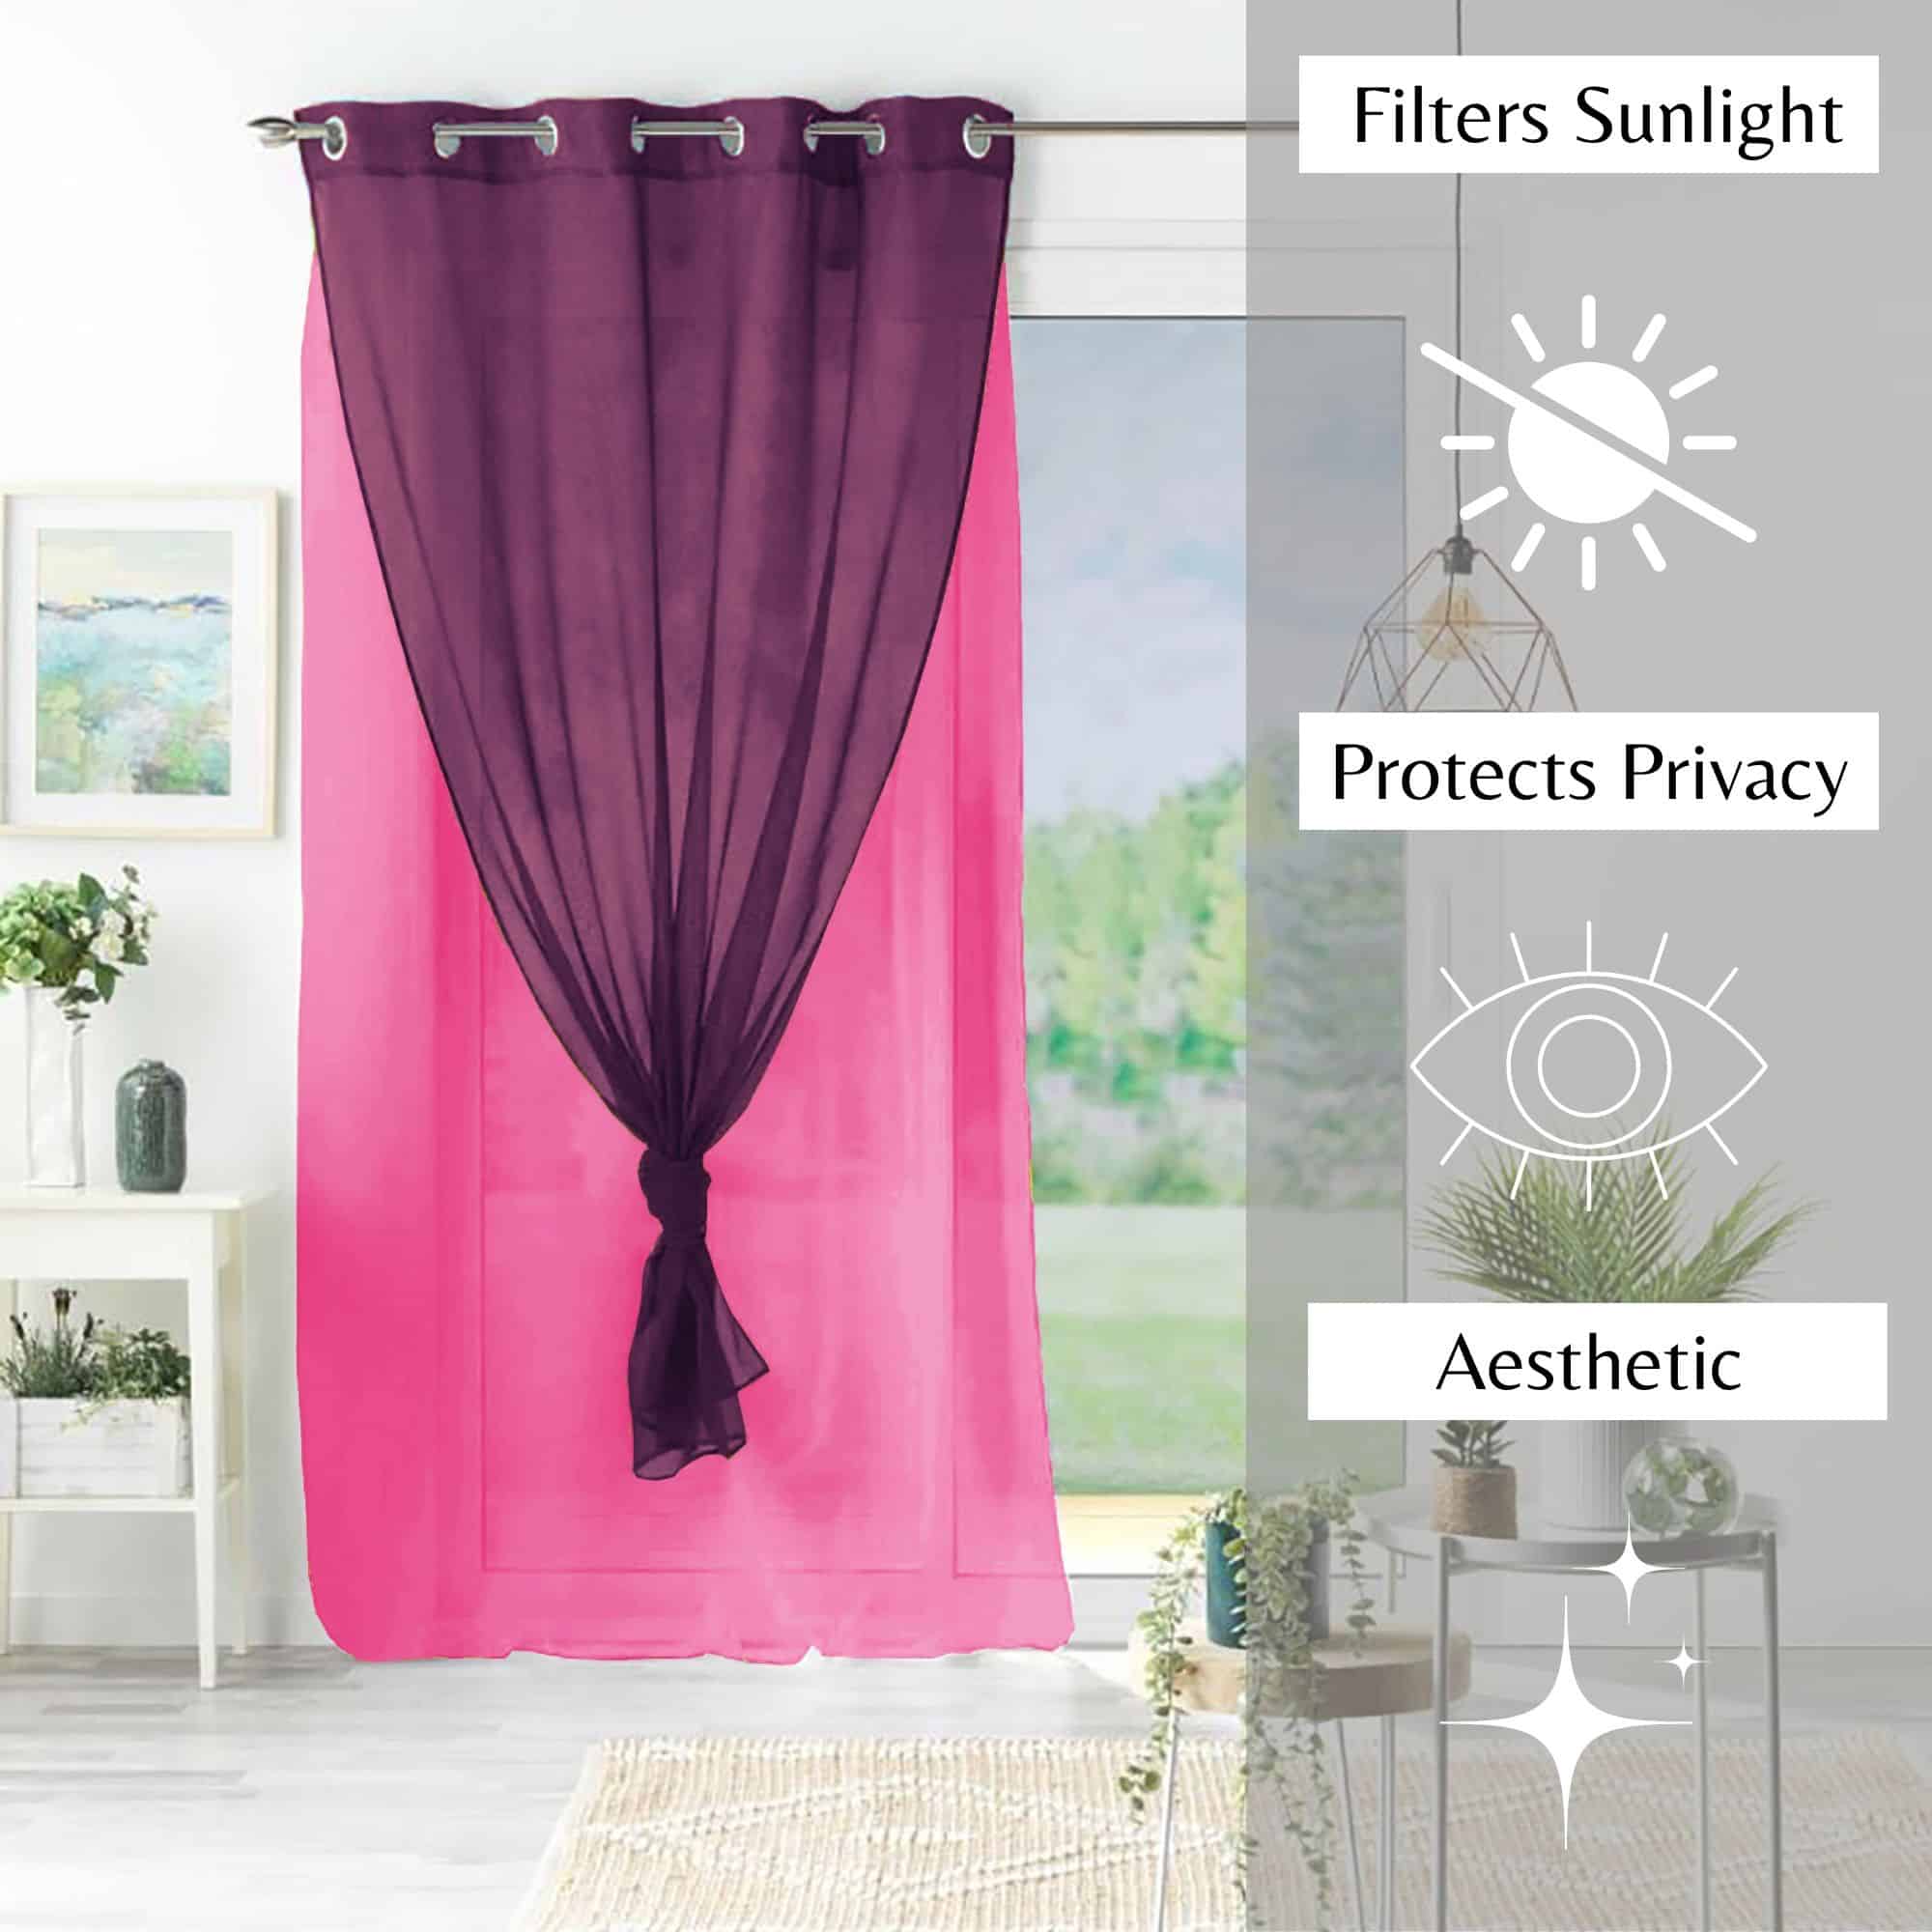 filters sunlight protects privacy aesthetic fuchsia pink and purple voile curtain panel for interior design